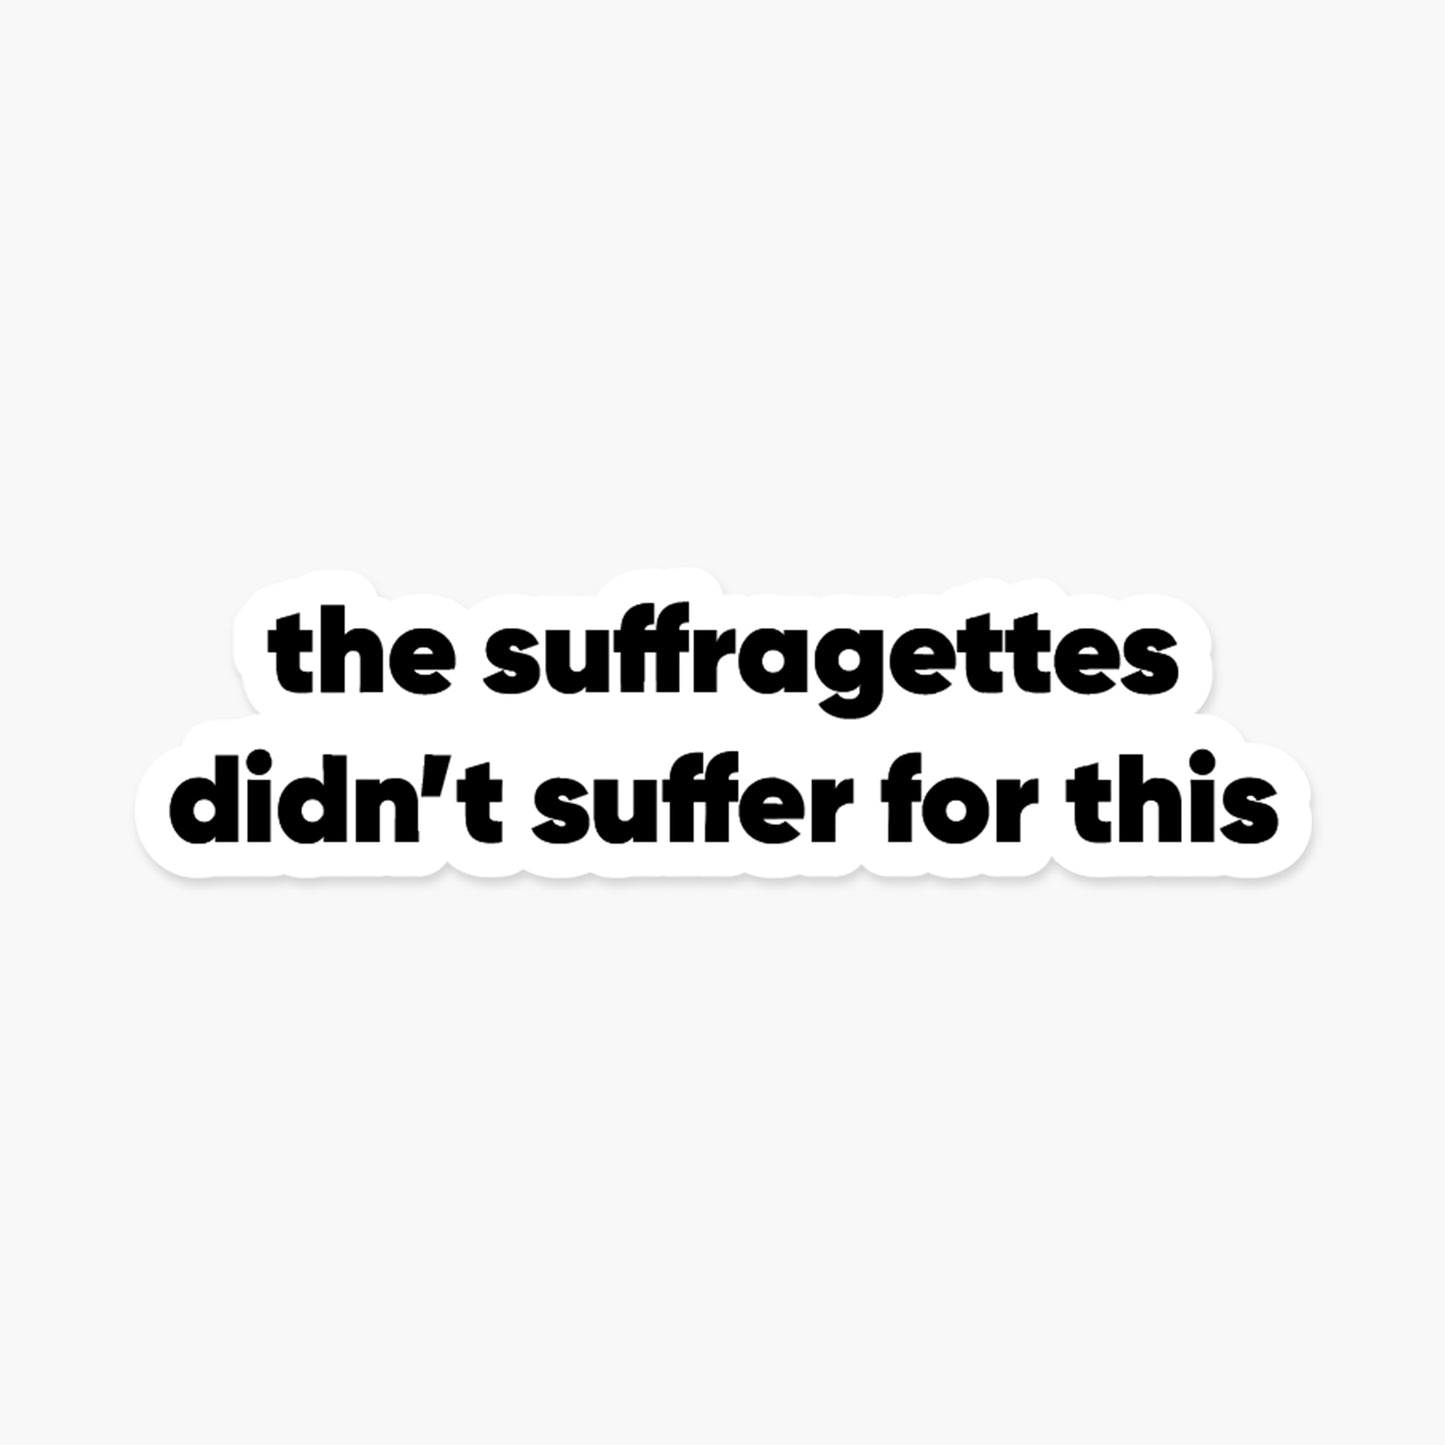 The suffragettes didn’t suffer for this - Feminist Sticker | Footnotes Paper